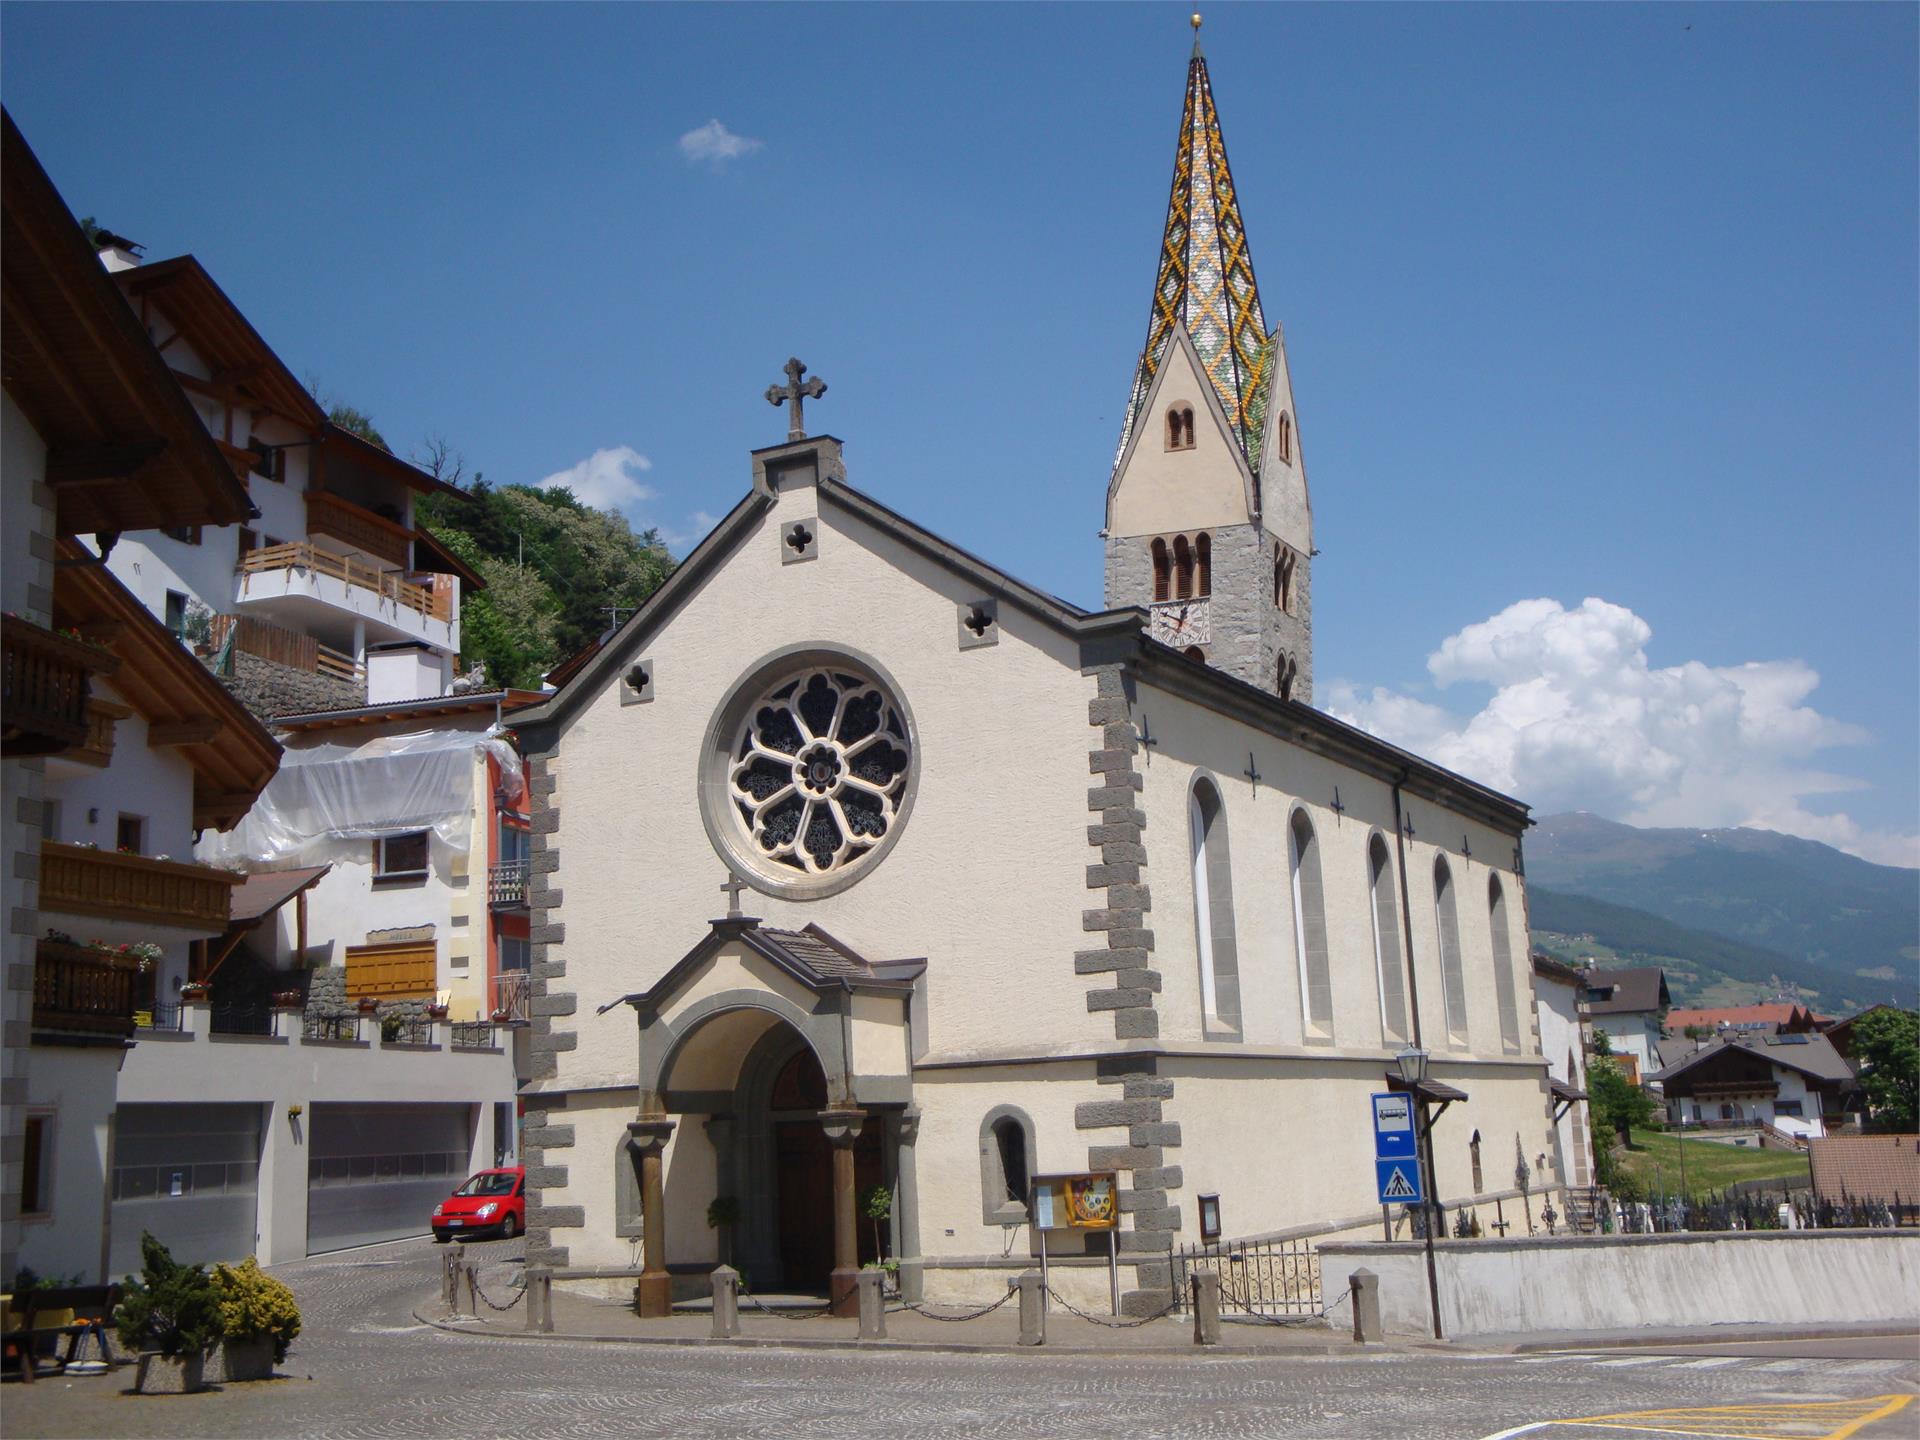 The parish church to St. Jacobs in Barbian